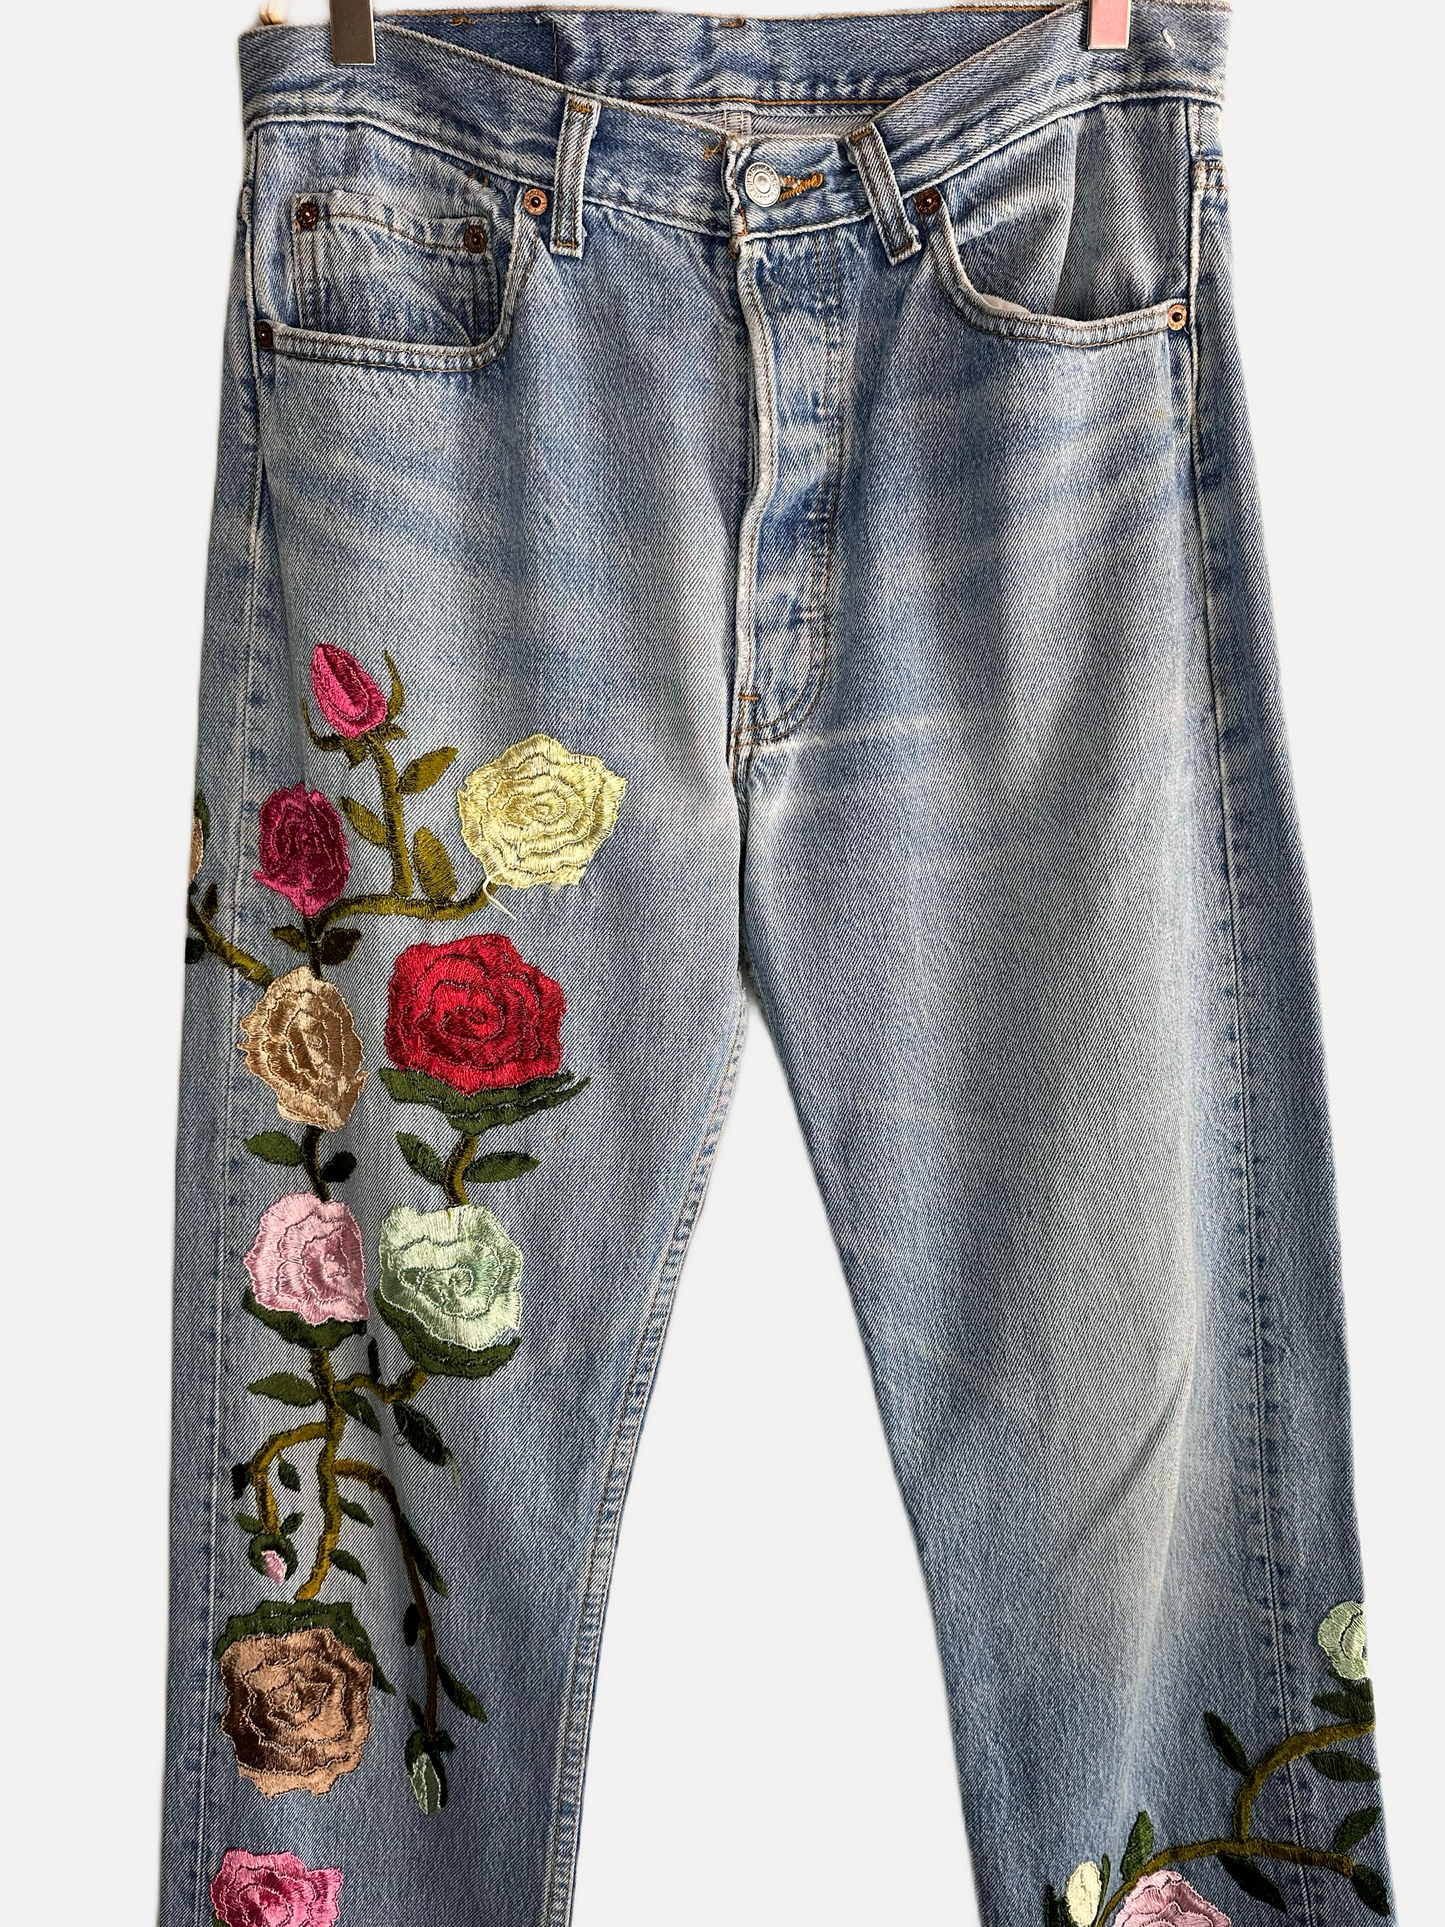 Embroidered Made in USA Levi's 501 Jeans